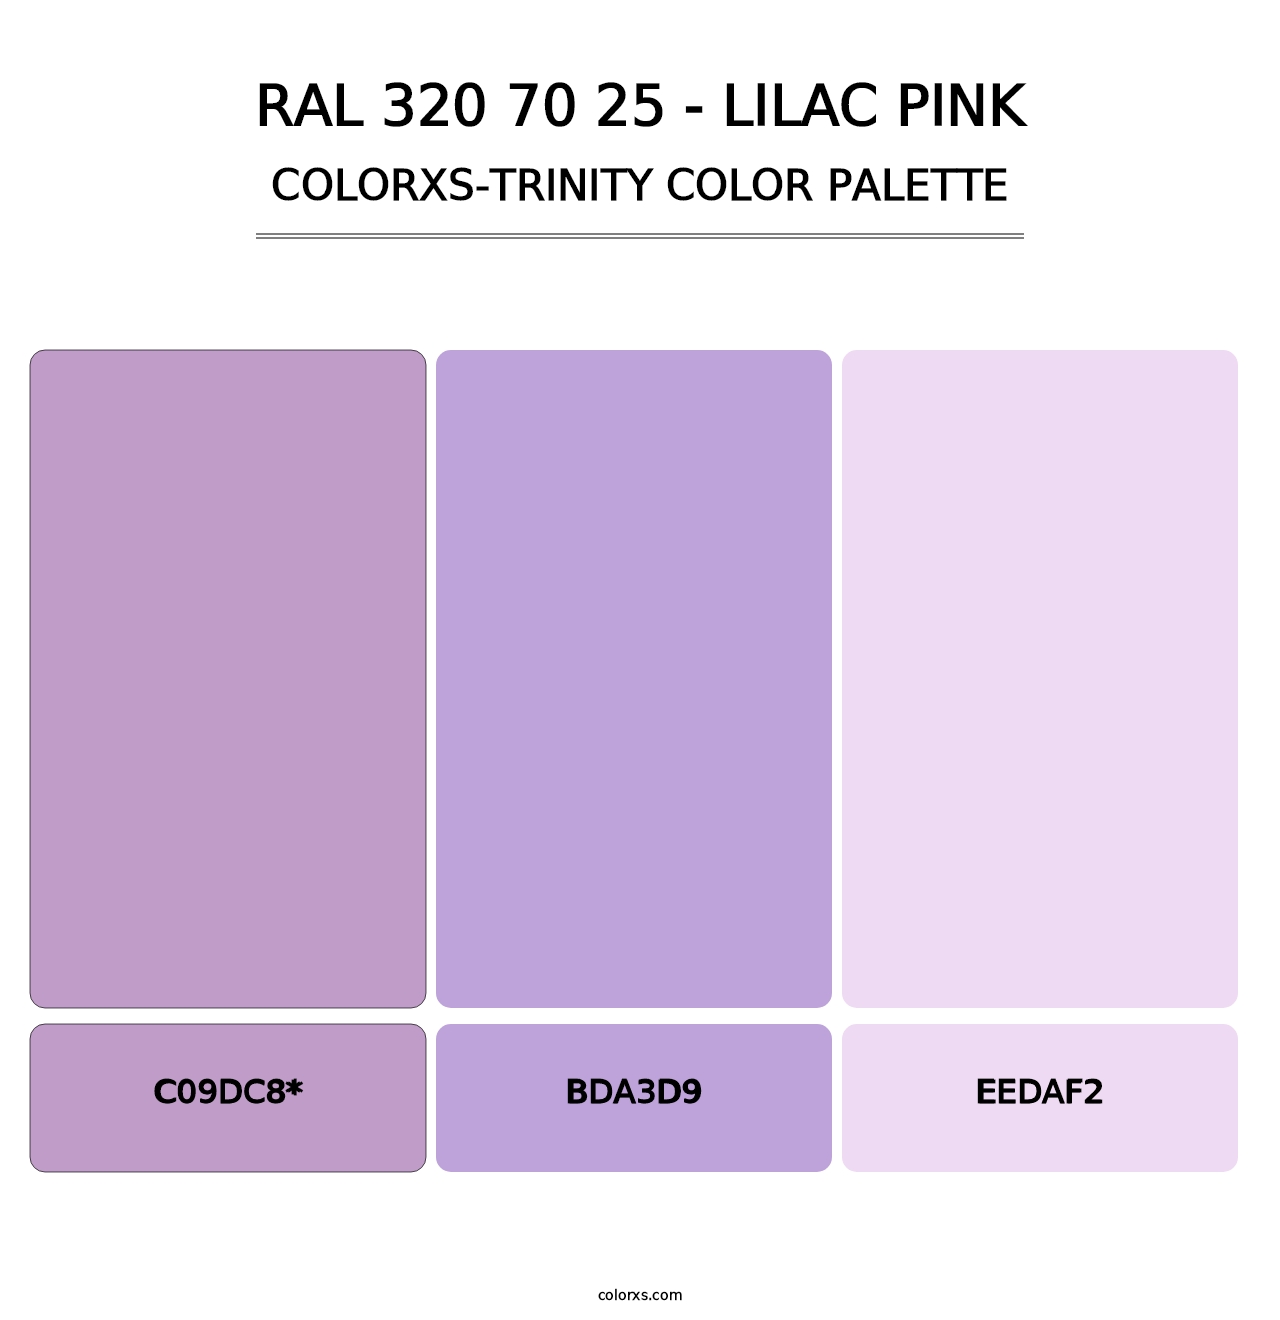 RAL 320 70 25 - Lilac Pink - Colorxs Trinity Palette